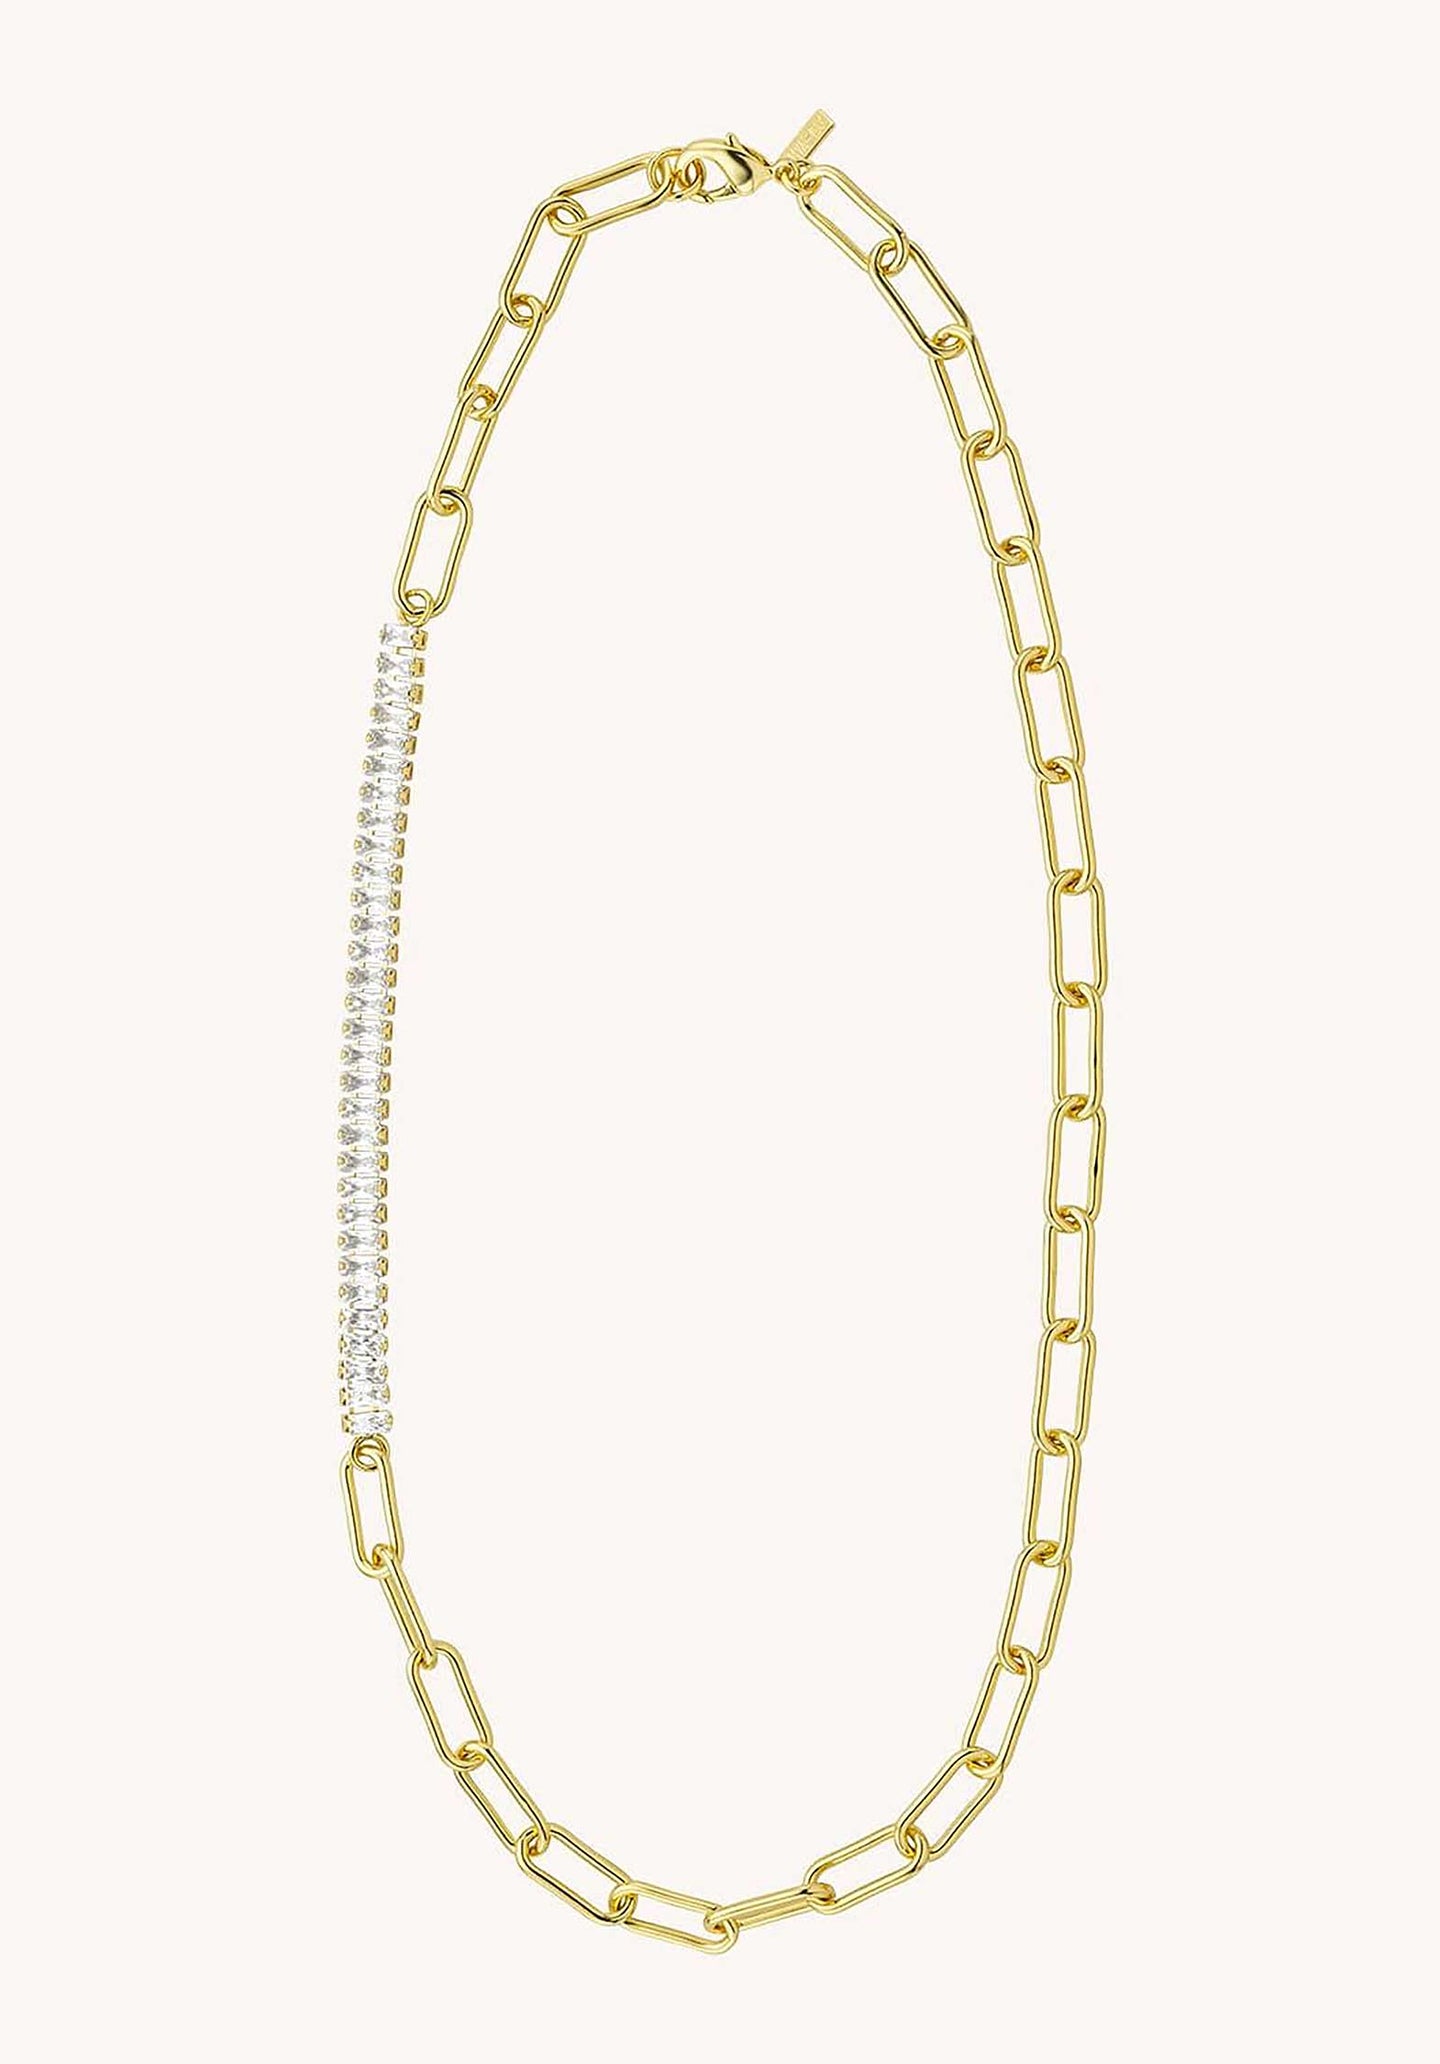 Necklace Co-193g Gold